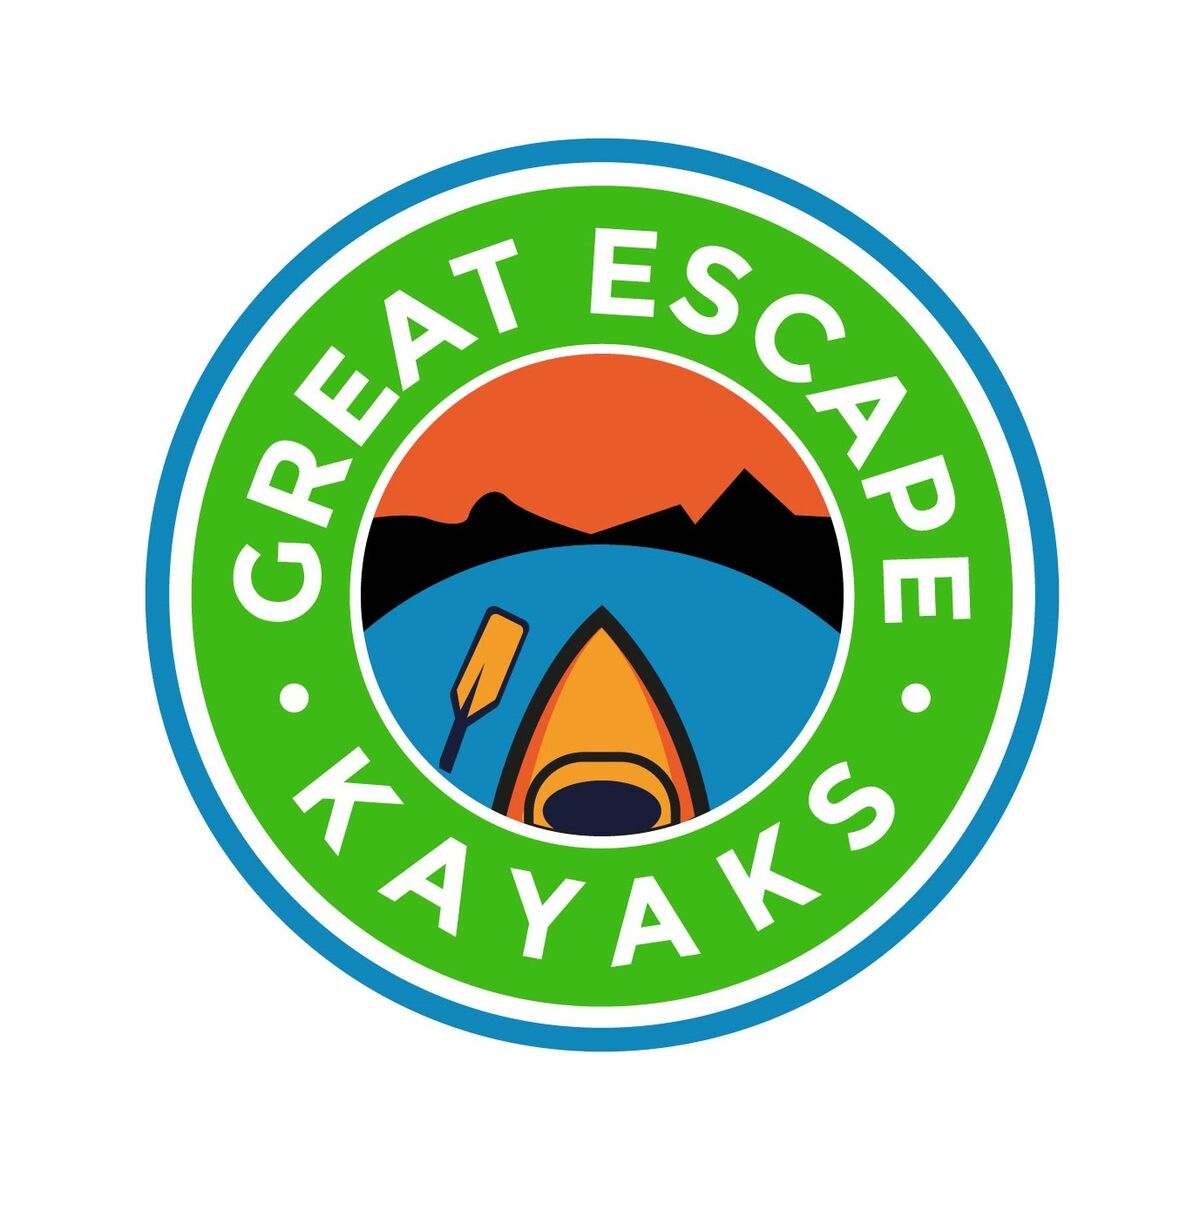 Great Escape Kayaks Inc.